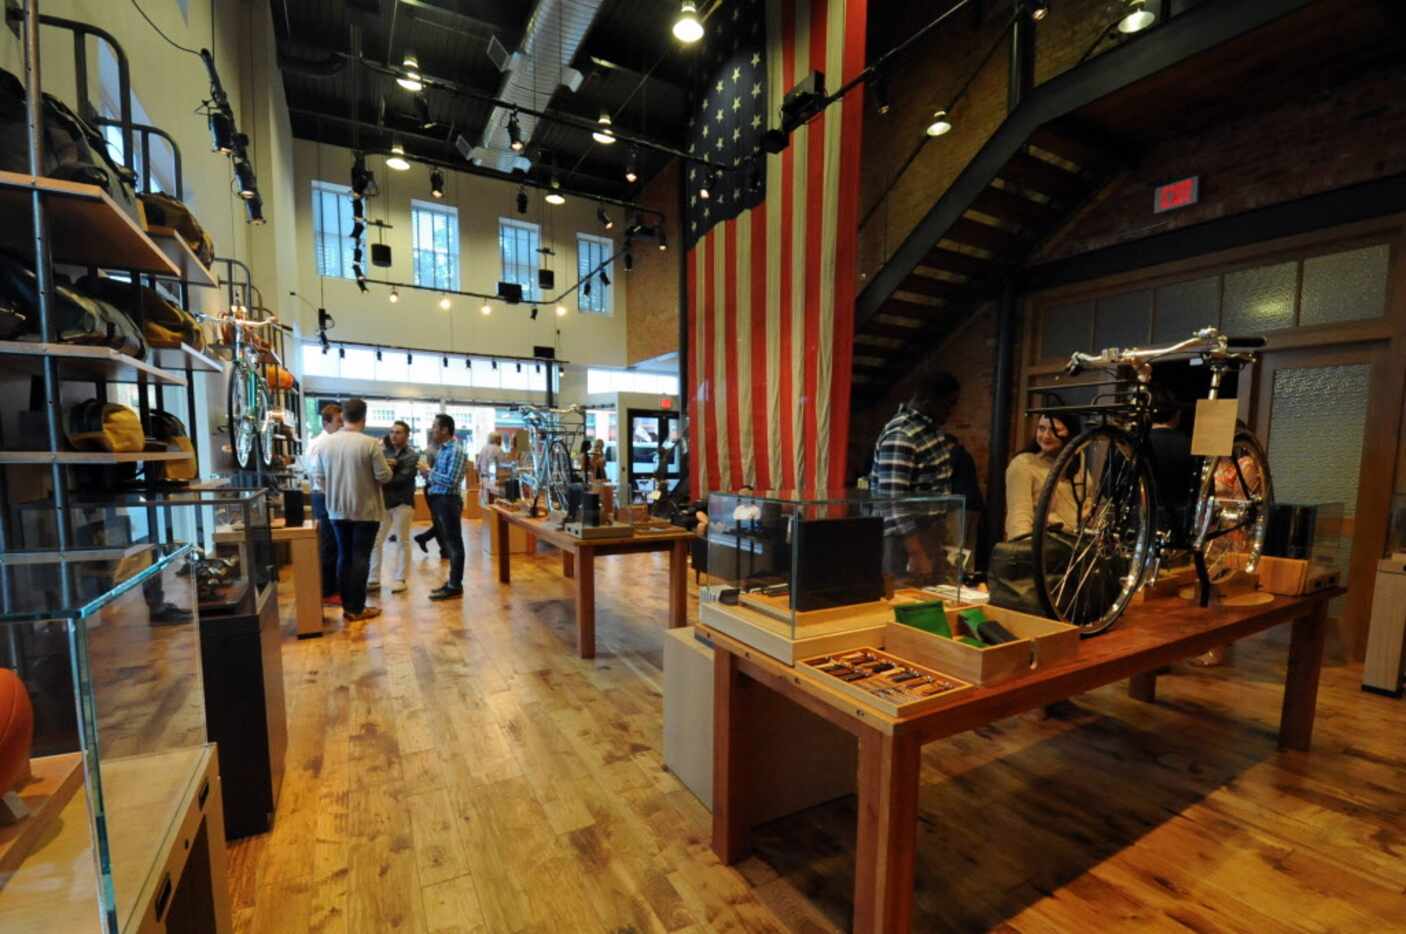 Detroit-based Shinola opens in Plano, TX offering leather goods, bicycles, and apparel on...